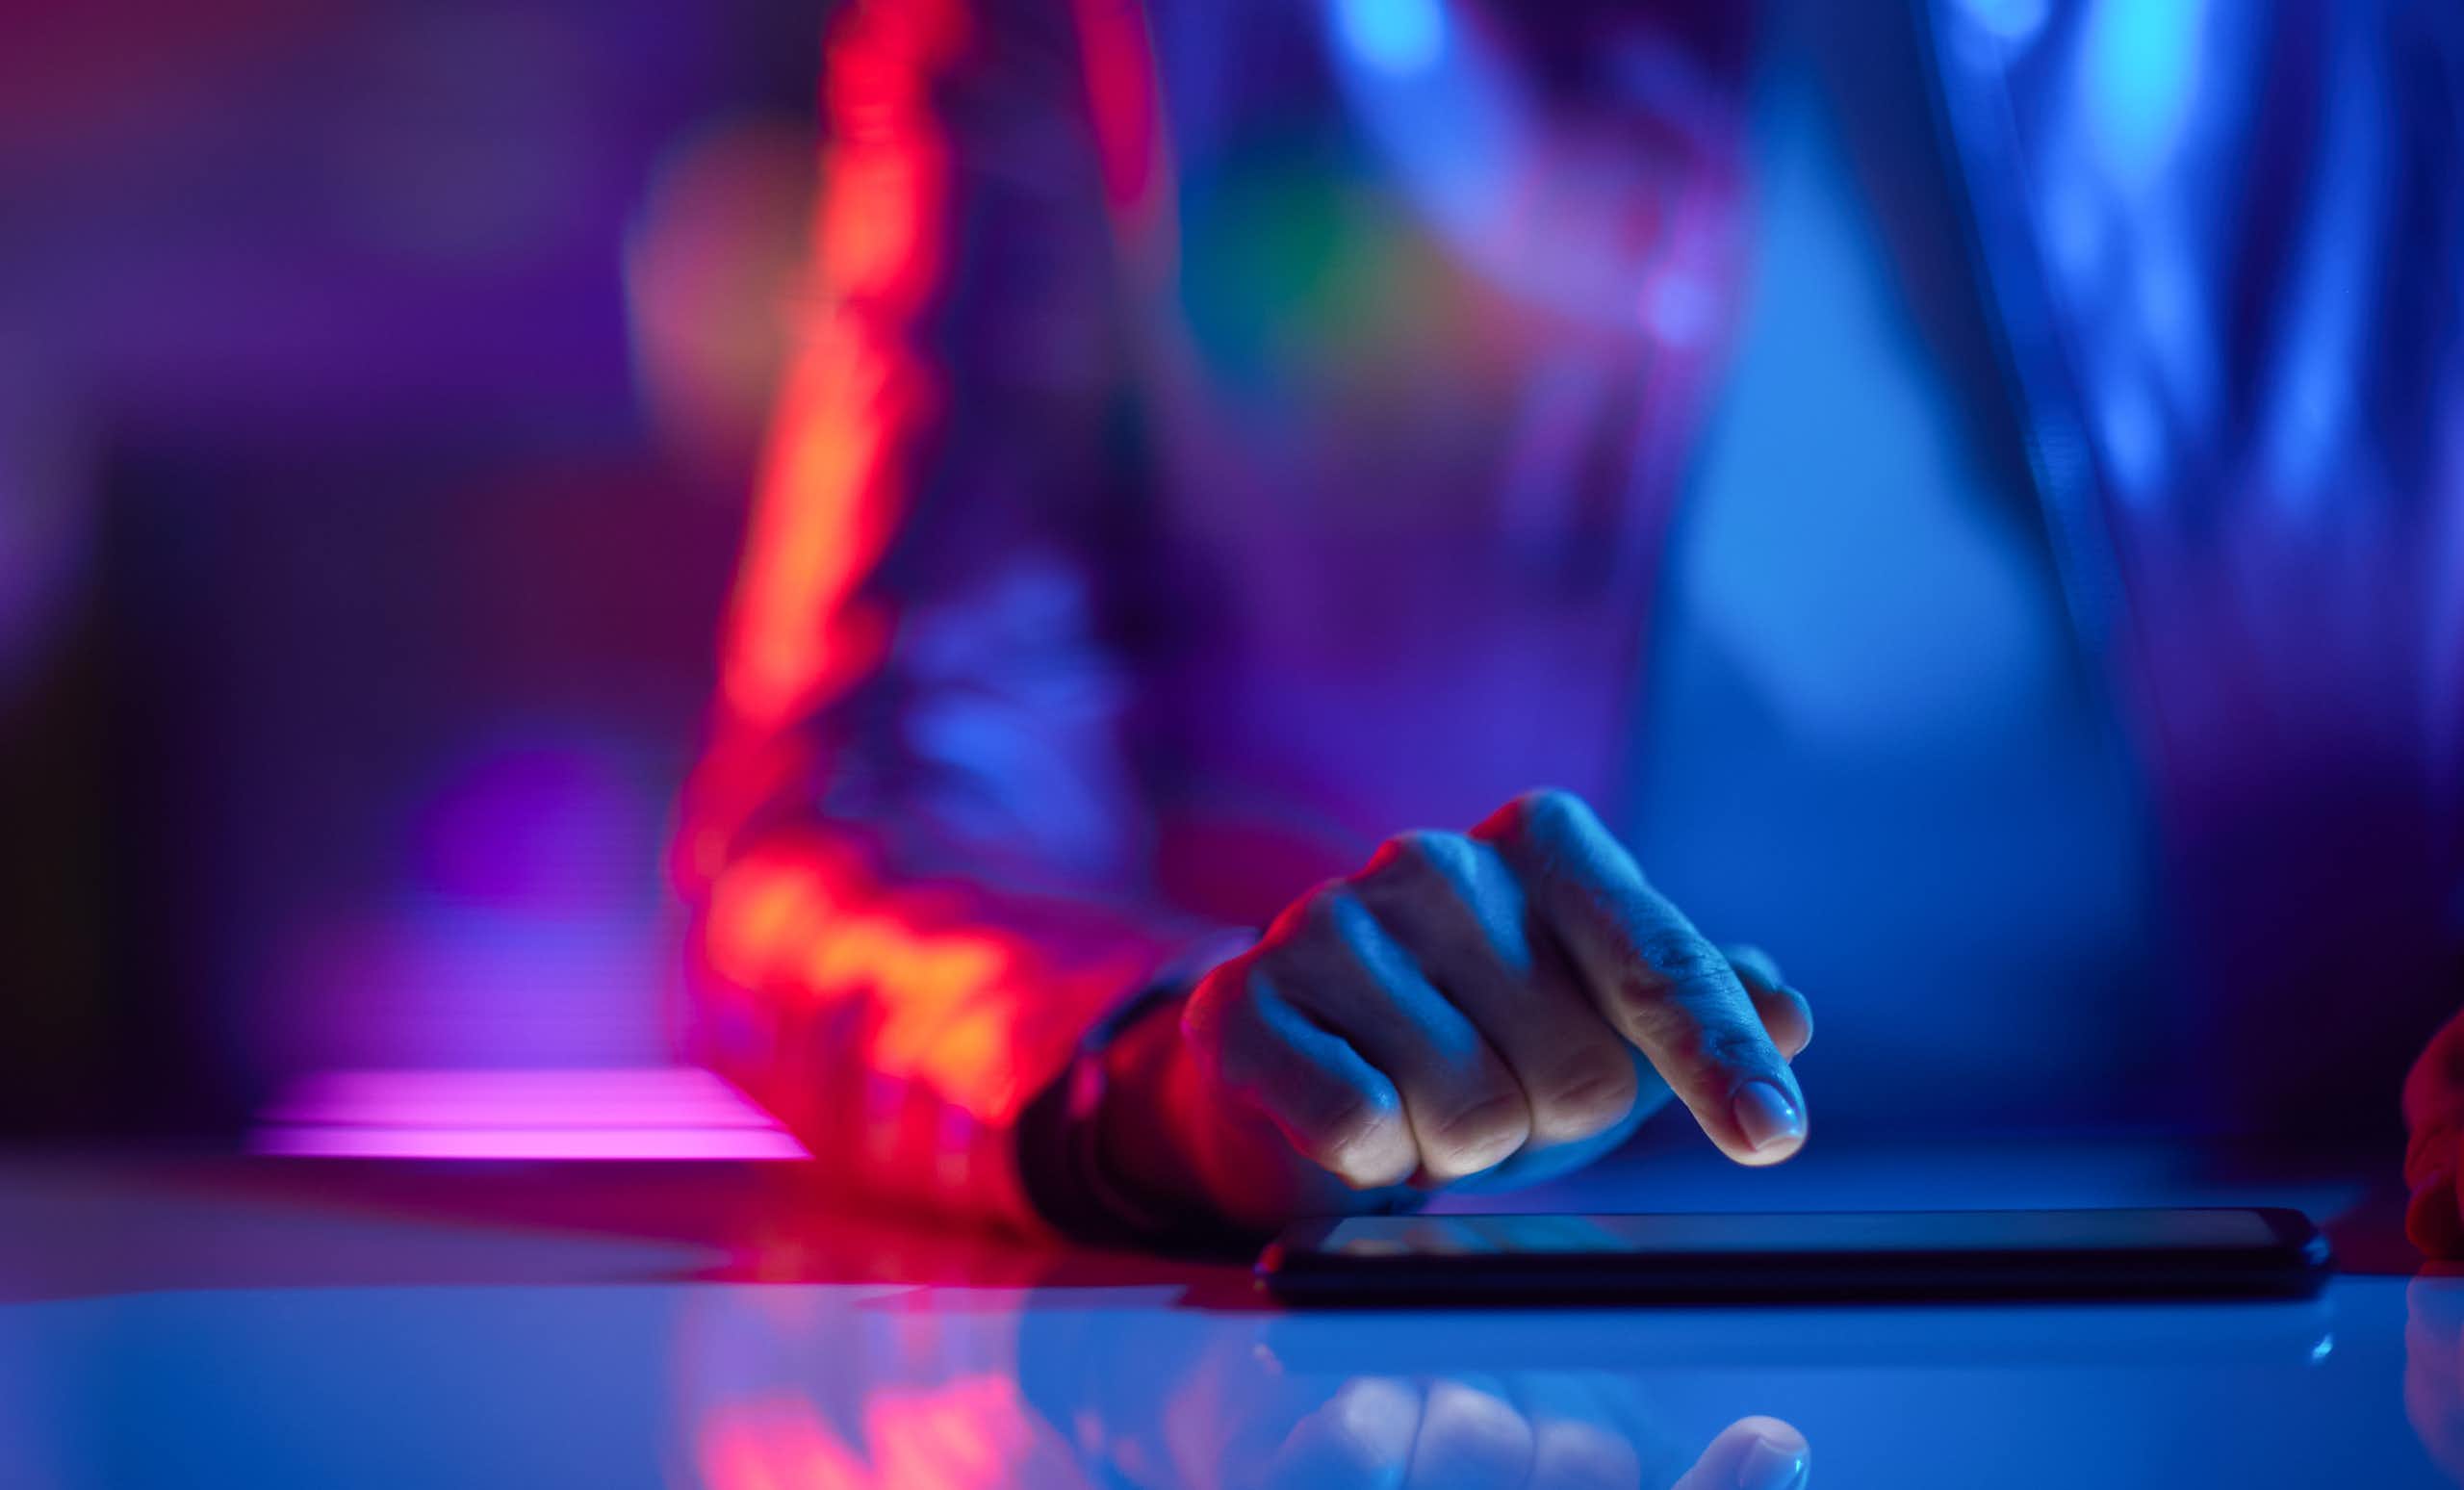 A red-blue lit image of a person tapping on a tablet device.